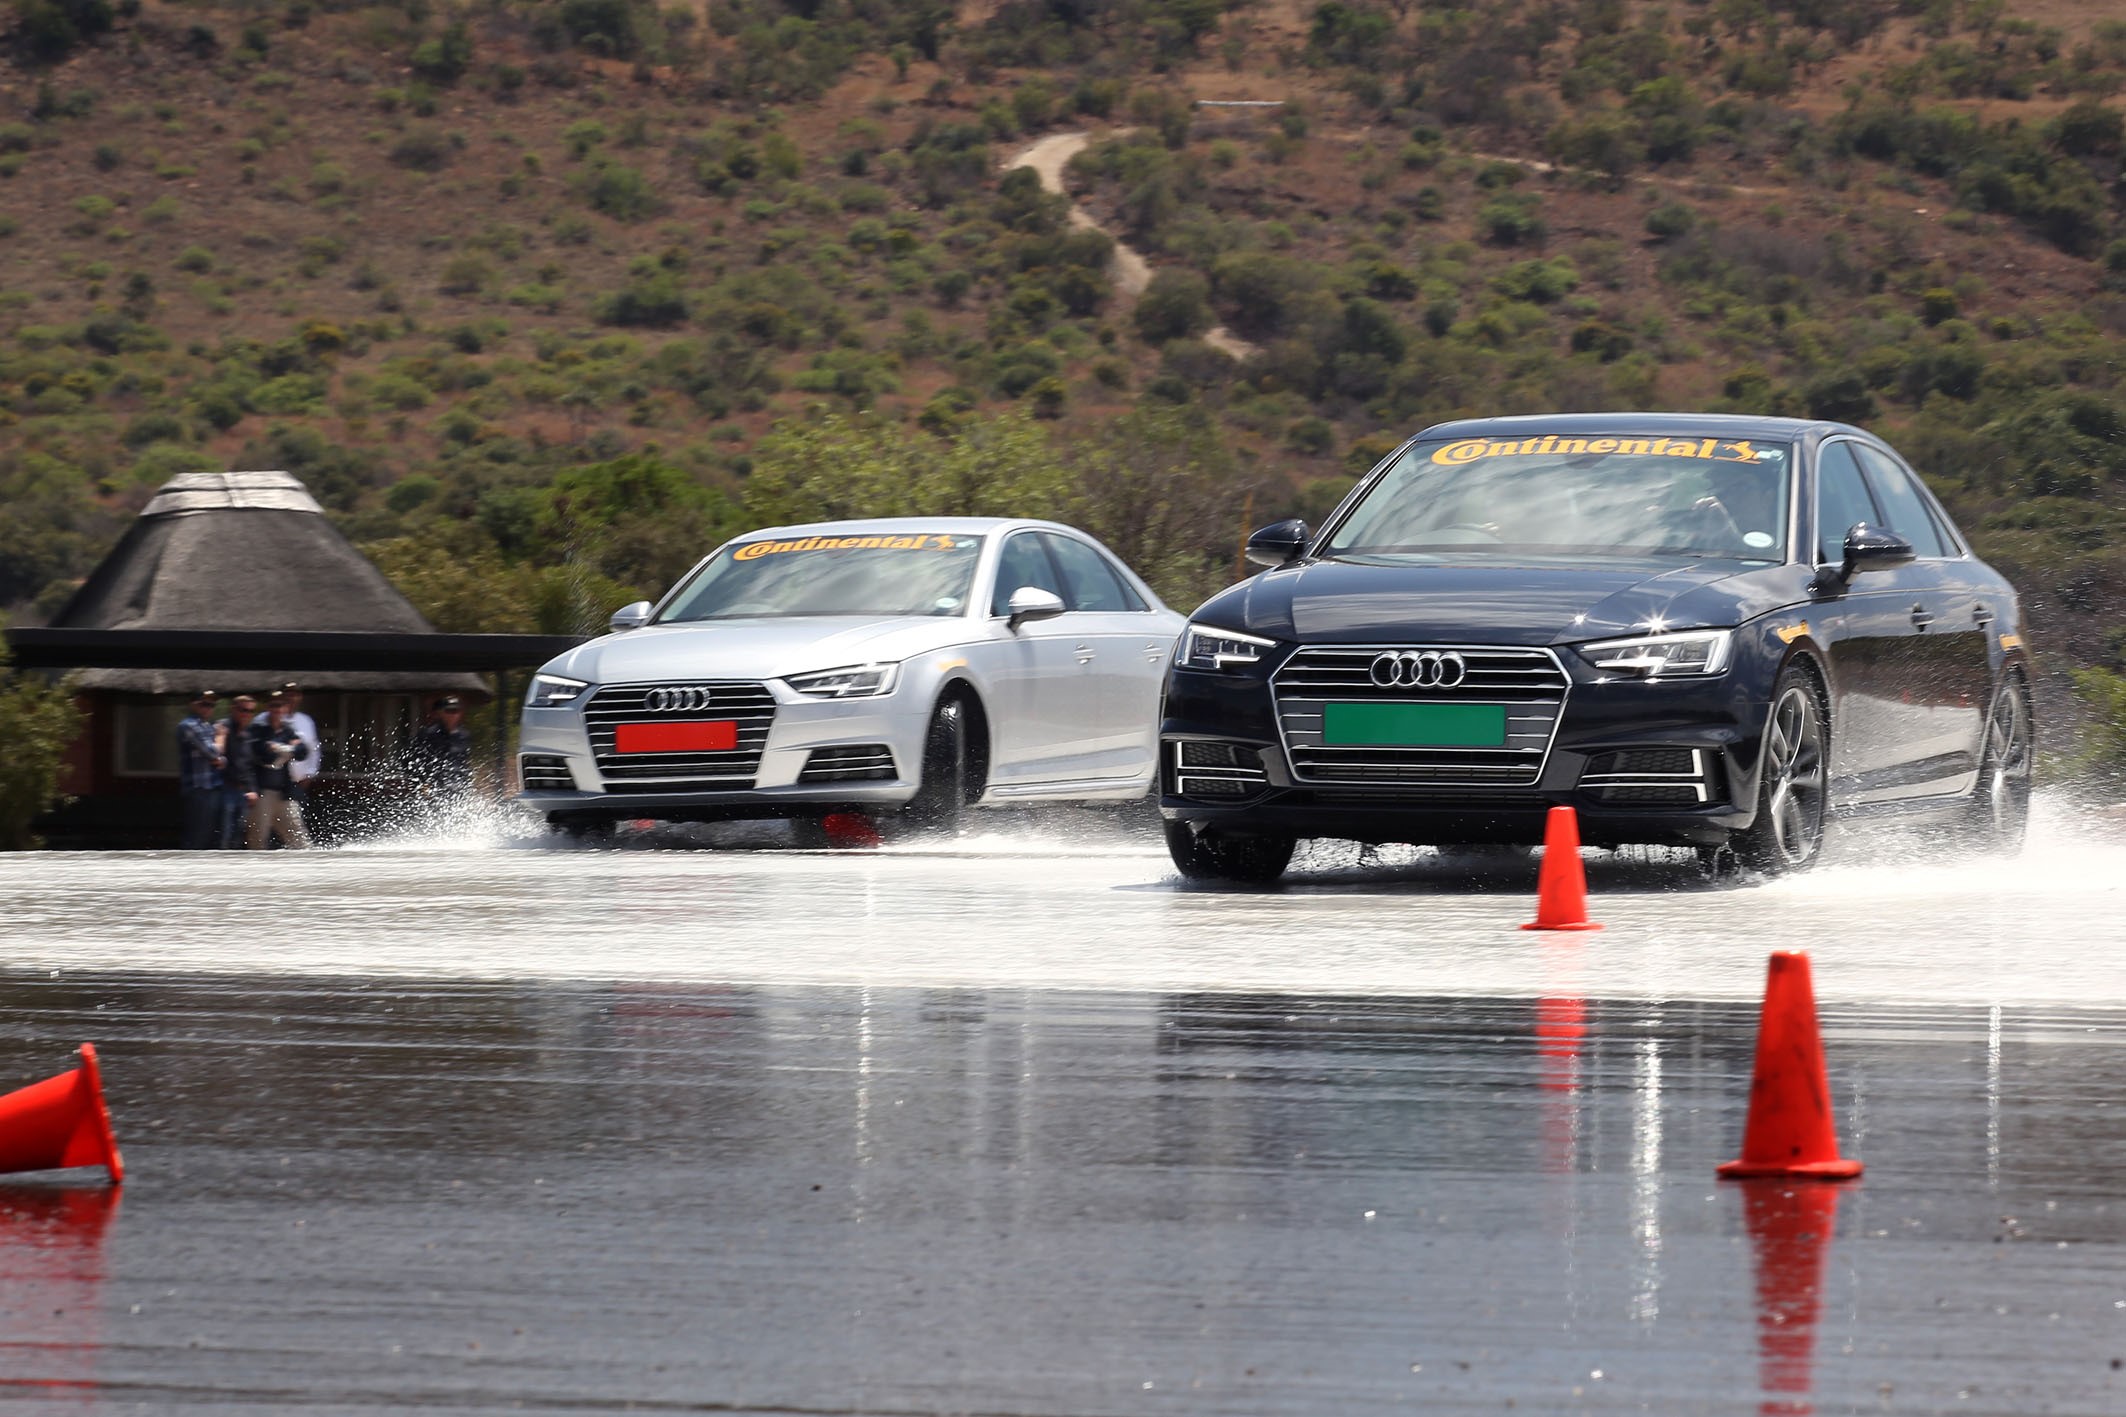 Photo by Inga Terblanche Two identical vehicles demonstrate handling on a wet skidpan at the Gerotek Test Facilities during the Automobile Association’s (AA) car tyre safety demonstration. The car on the right (green number plate) has brand new tyres, the car on the left (red number plate) has worn tyres. 